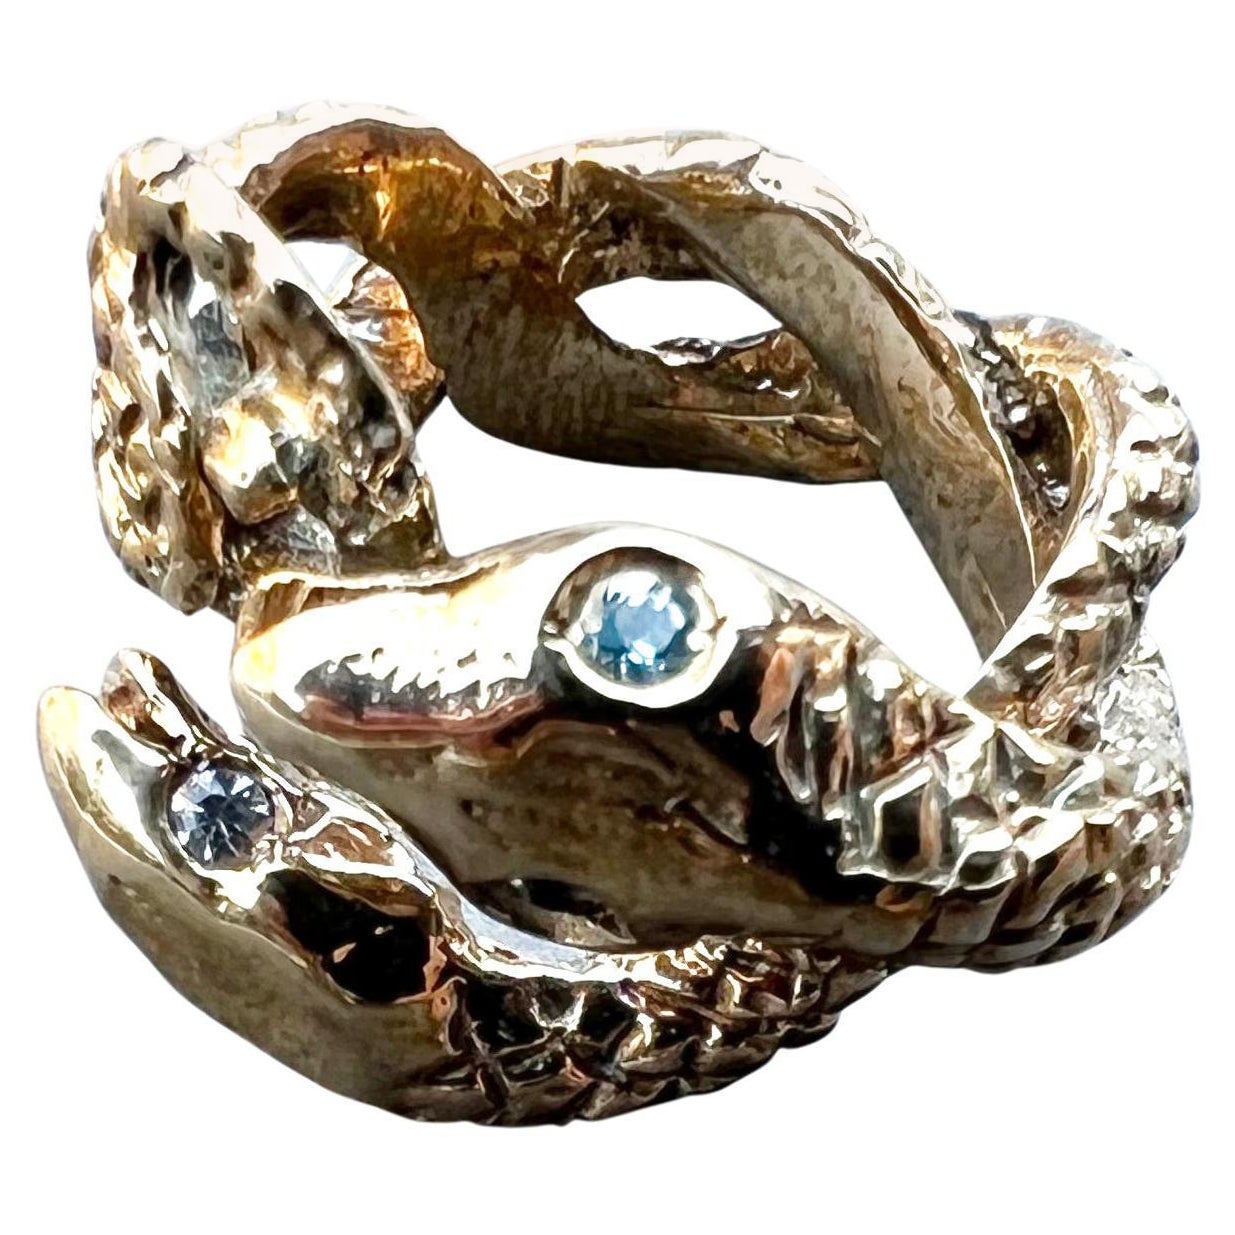 Animal jewelry Aquamarine Snake Ring Bronze Cocktail Ring J Dauphin In New Condition For Sale In Los Angeles, CA